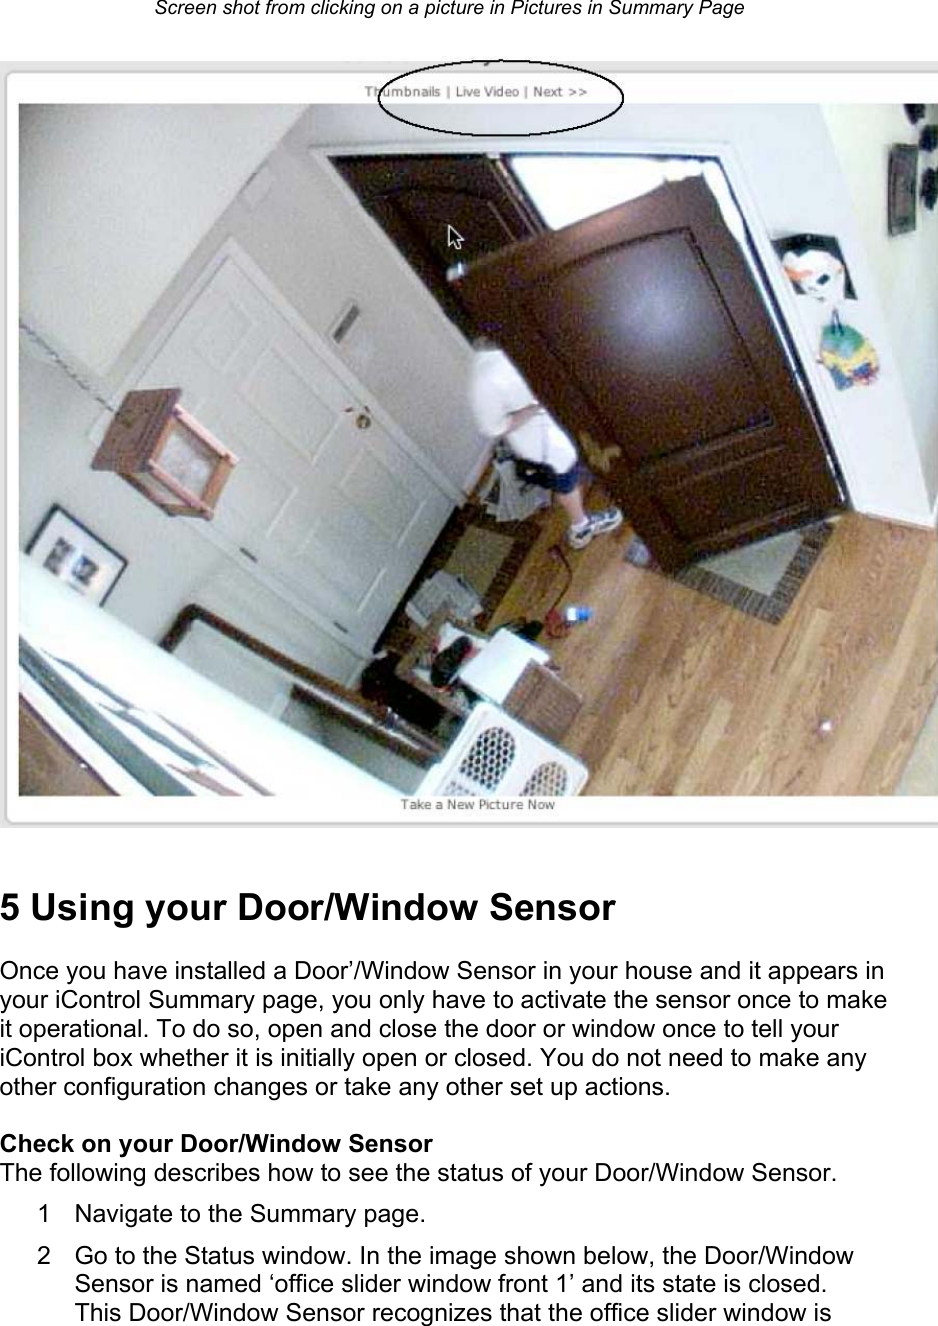 Screen shot from clicking on a picture in Pictures in Summary Page   5 Using your Door/Window Sensor  Once you have installed a Door’/Window Sensor in your house and it appears in your iControl Summary page, you only have to activate the sensor once to make it operational. To do so, open and close the door or window once to tell your iControl box whether it is initially open or closed. You do not need to make any other configuration changes or take any other set up actions.  Check on your Door/Window Sensor  The following describes how to see the status of your Door/Window Sensor.  1  Navigate to the Summary page.  2  Go to the Status window. In the image shown below, the Door/Window Sensor is named ‘office slider window front 1’ and its state is closed. This Door/Window Sensor recognizes that the office slider window is 